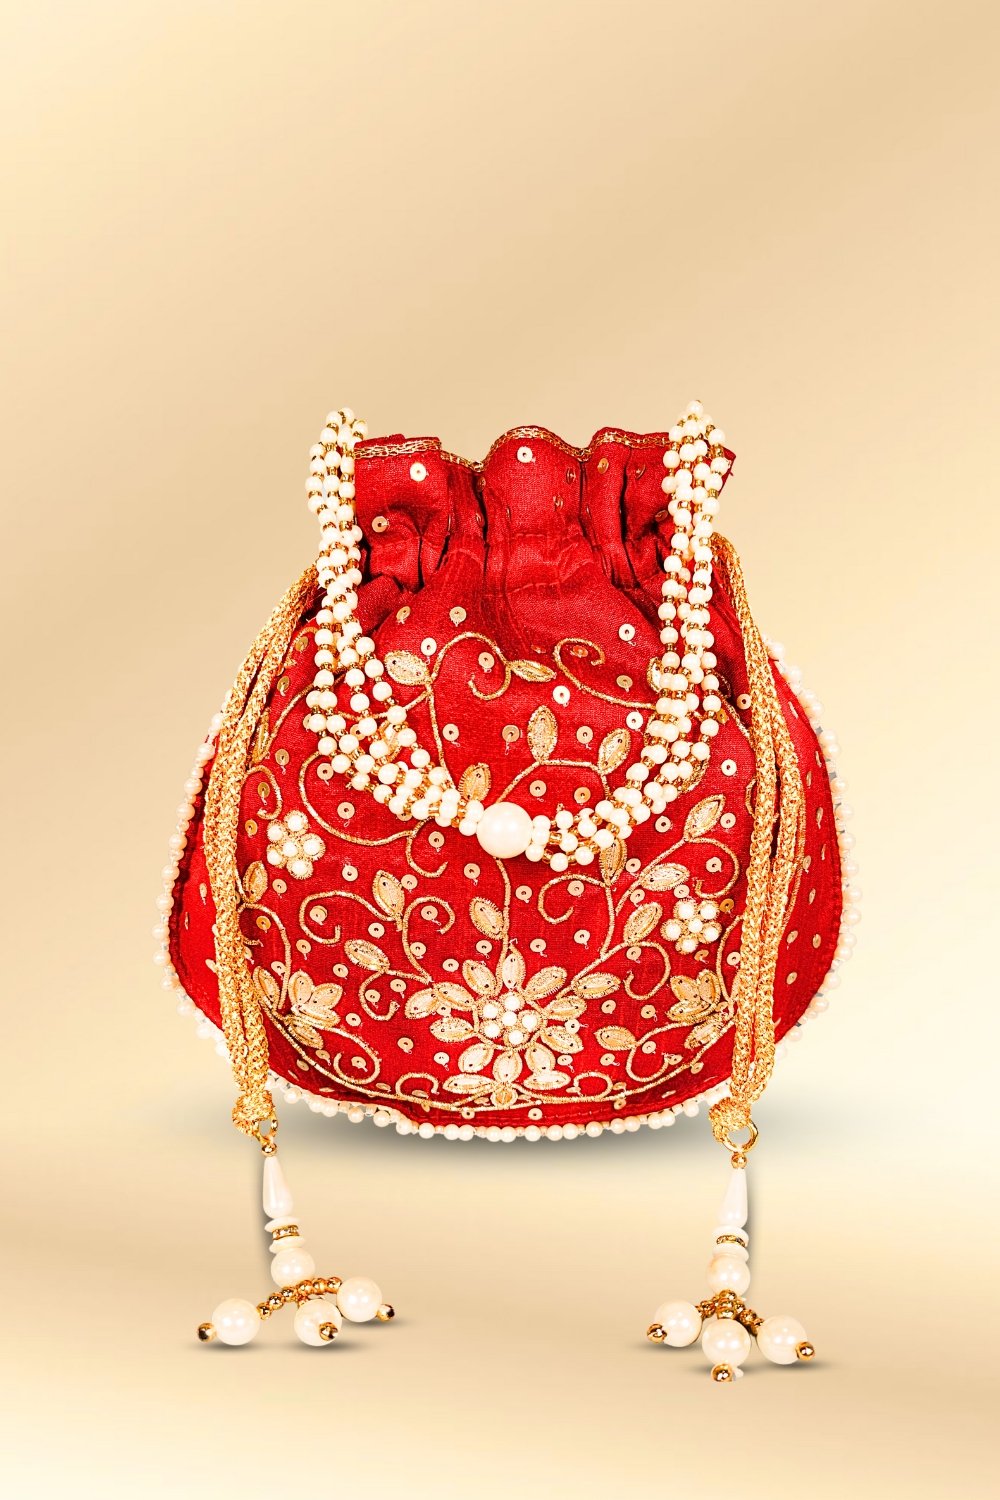 Potli Bags and Their Role in Indian Engagement Ceremonies